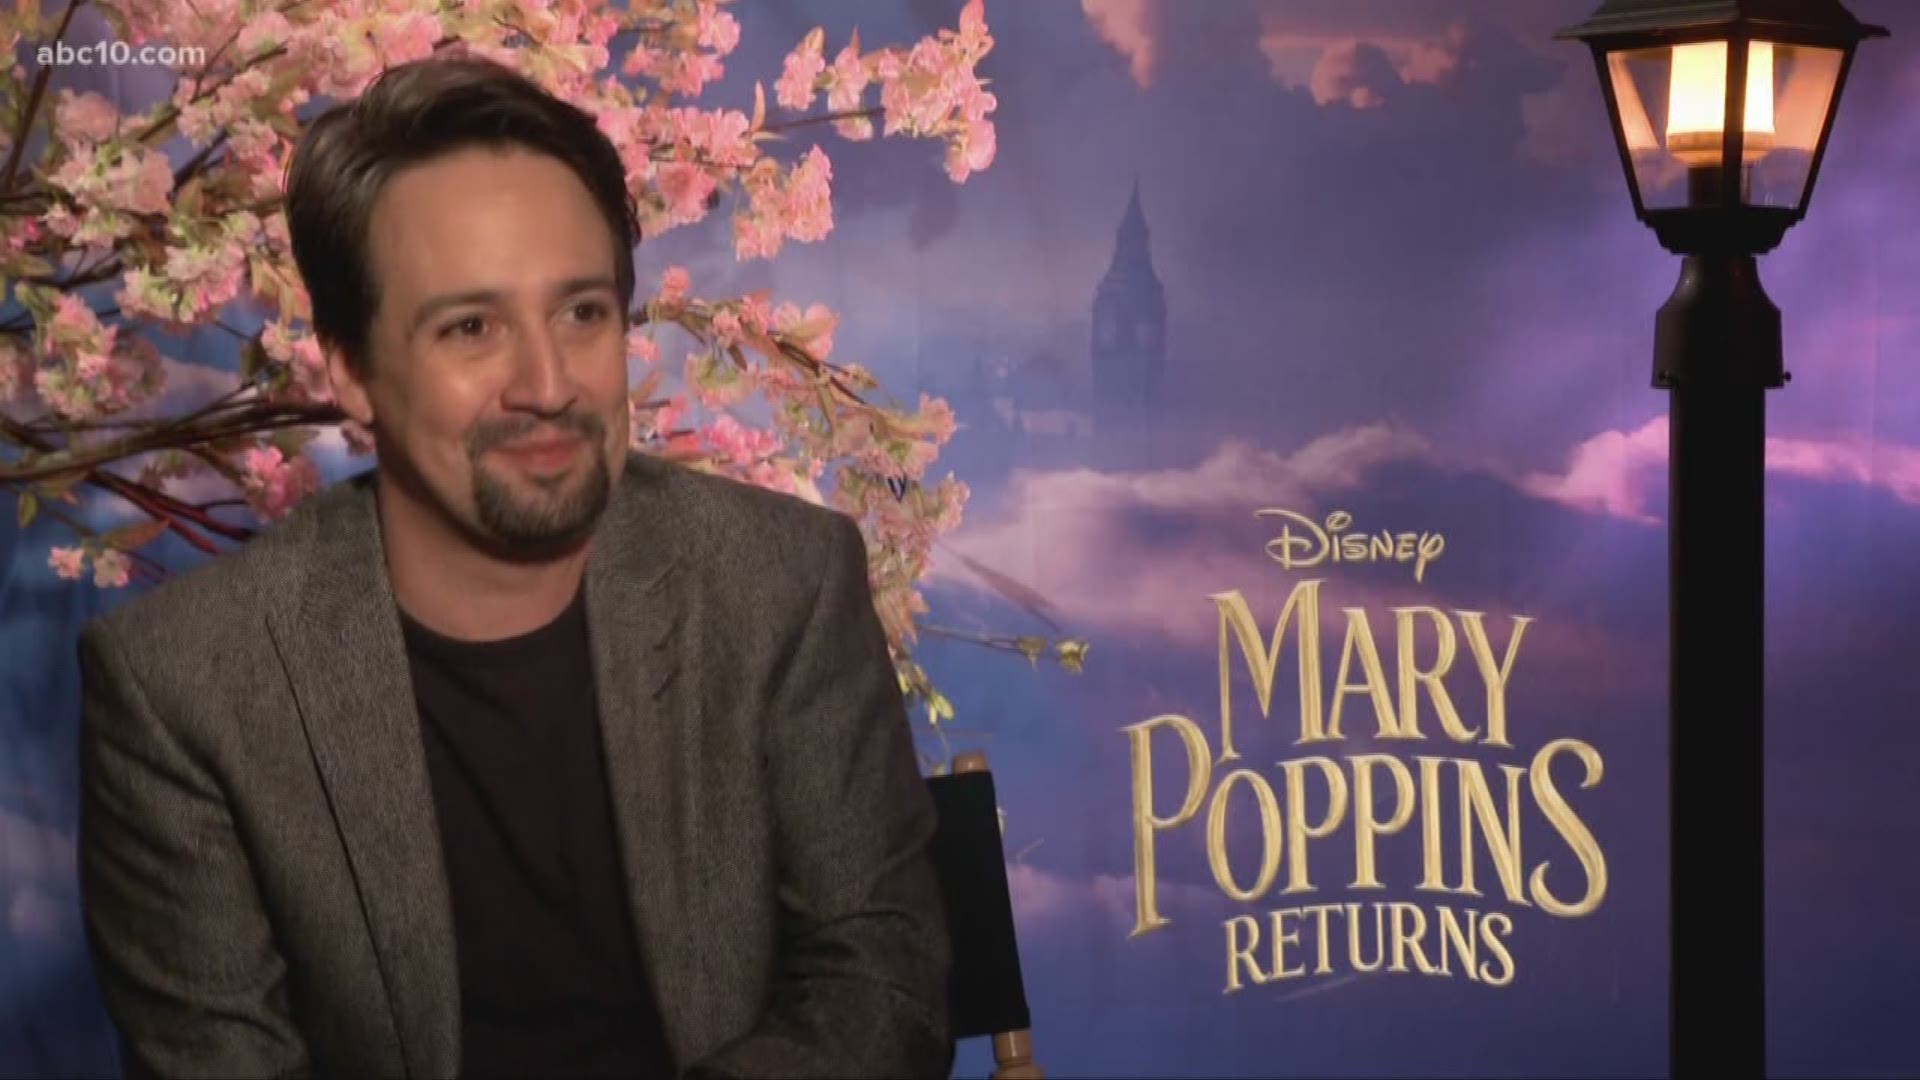 Mark S. Allen sat down with Lin-Manuel Miranda to talk about all things "Mary Poppins Returns."